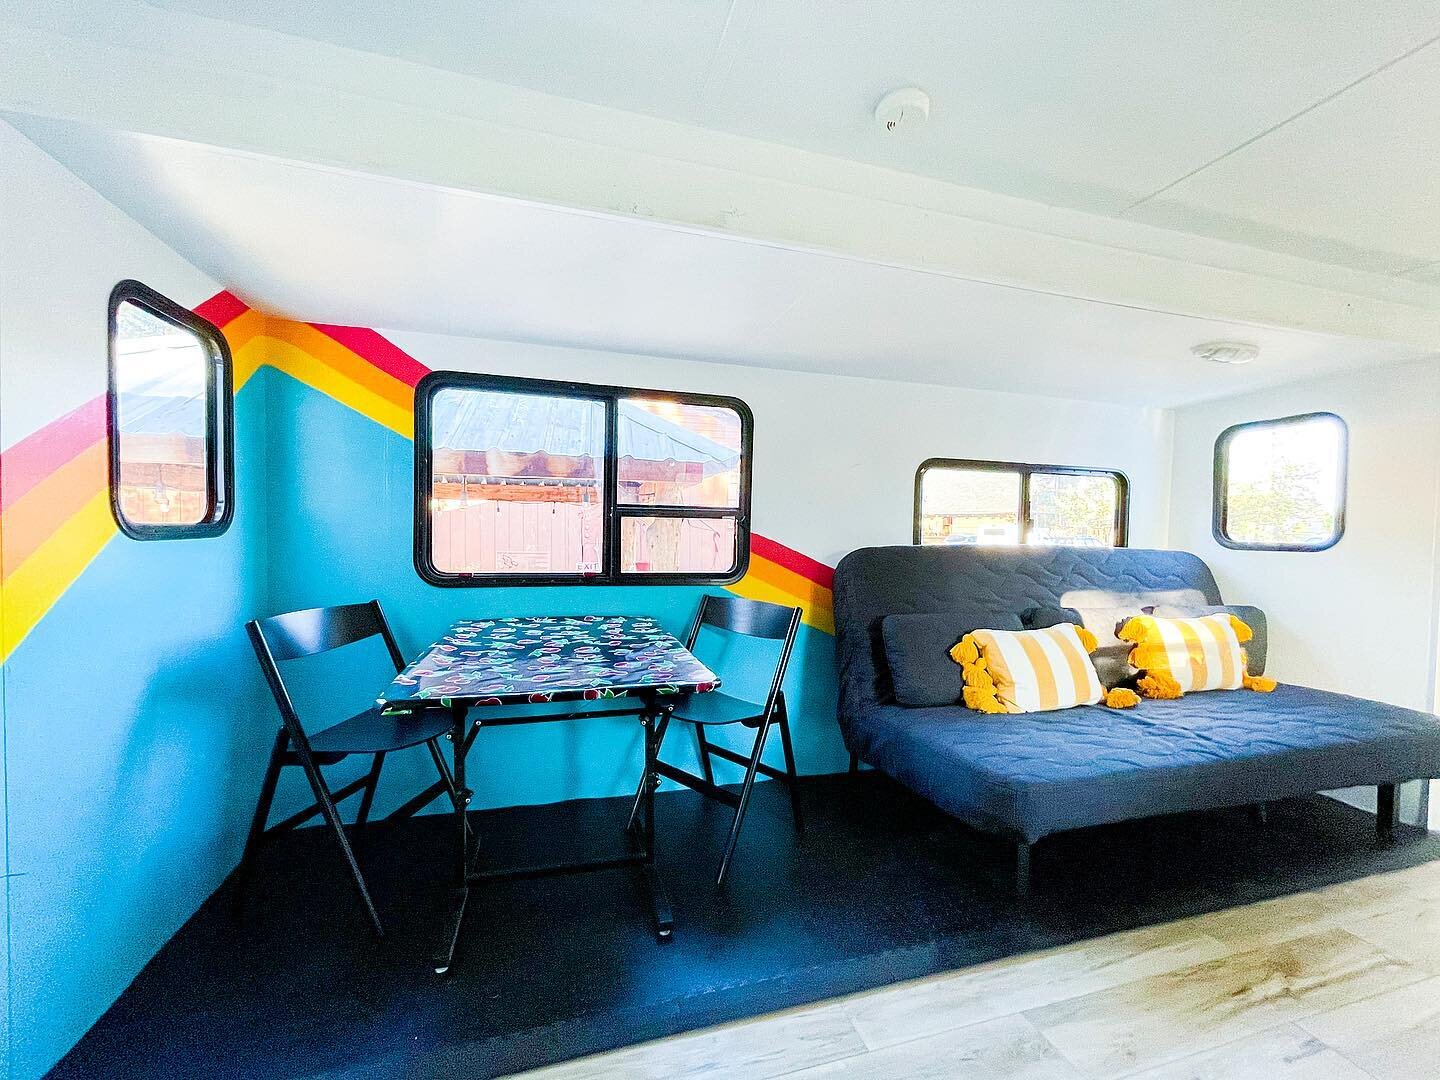 Well...I think it&rsquo;s safe to say that this RV will stand out in the crowd amongst the other @airbnb listings. ⚡️🌈 Almost finished with this project. I can&rsquo;t wait to give you the grand tour!